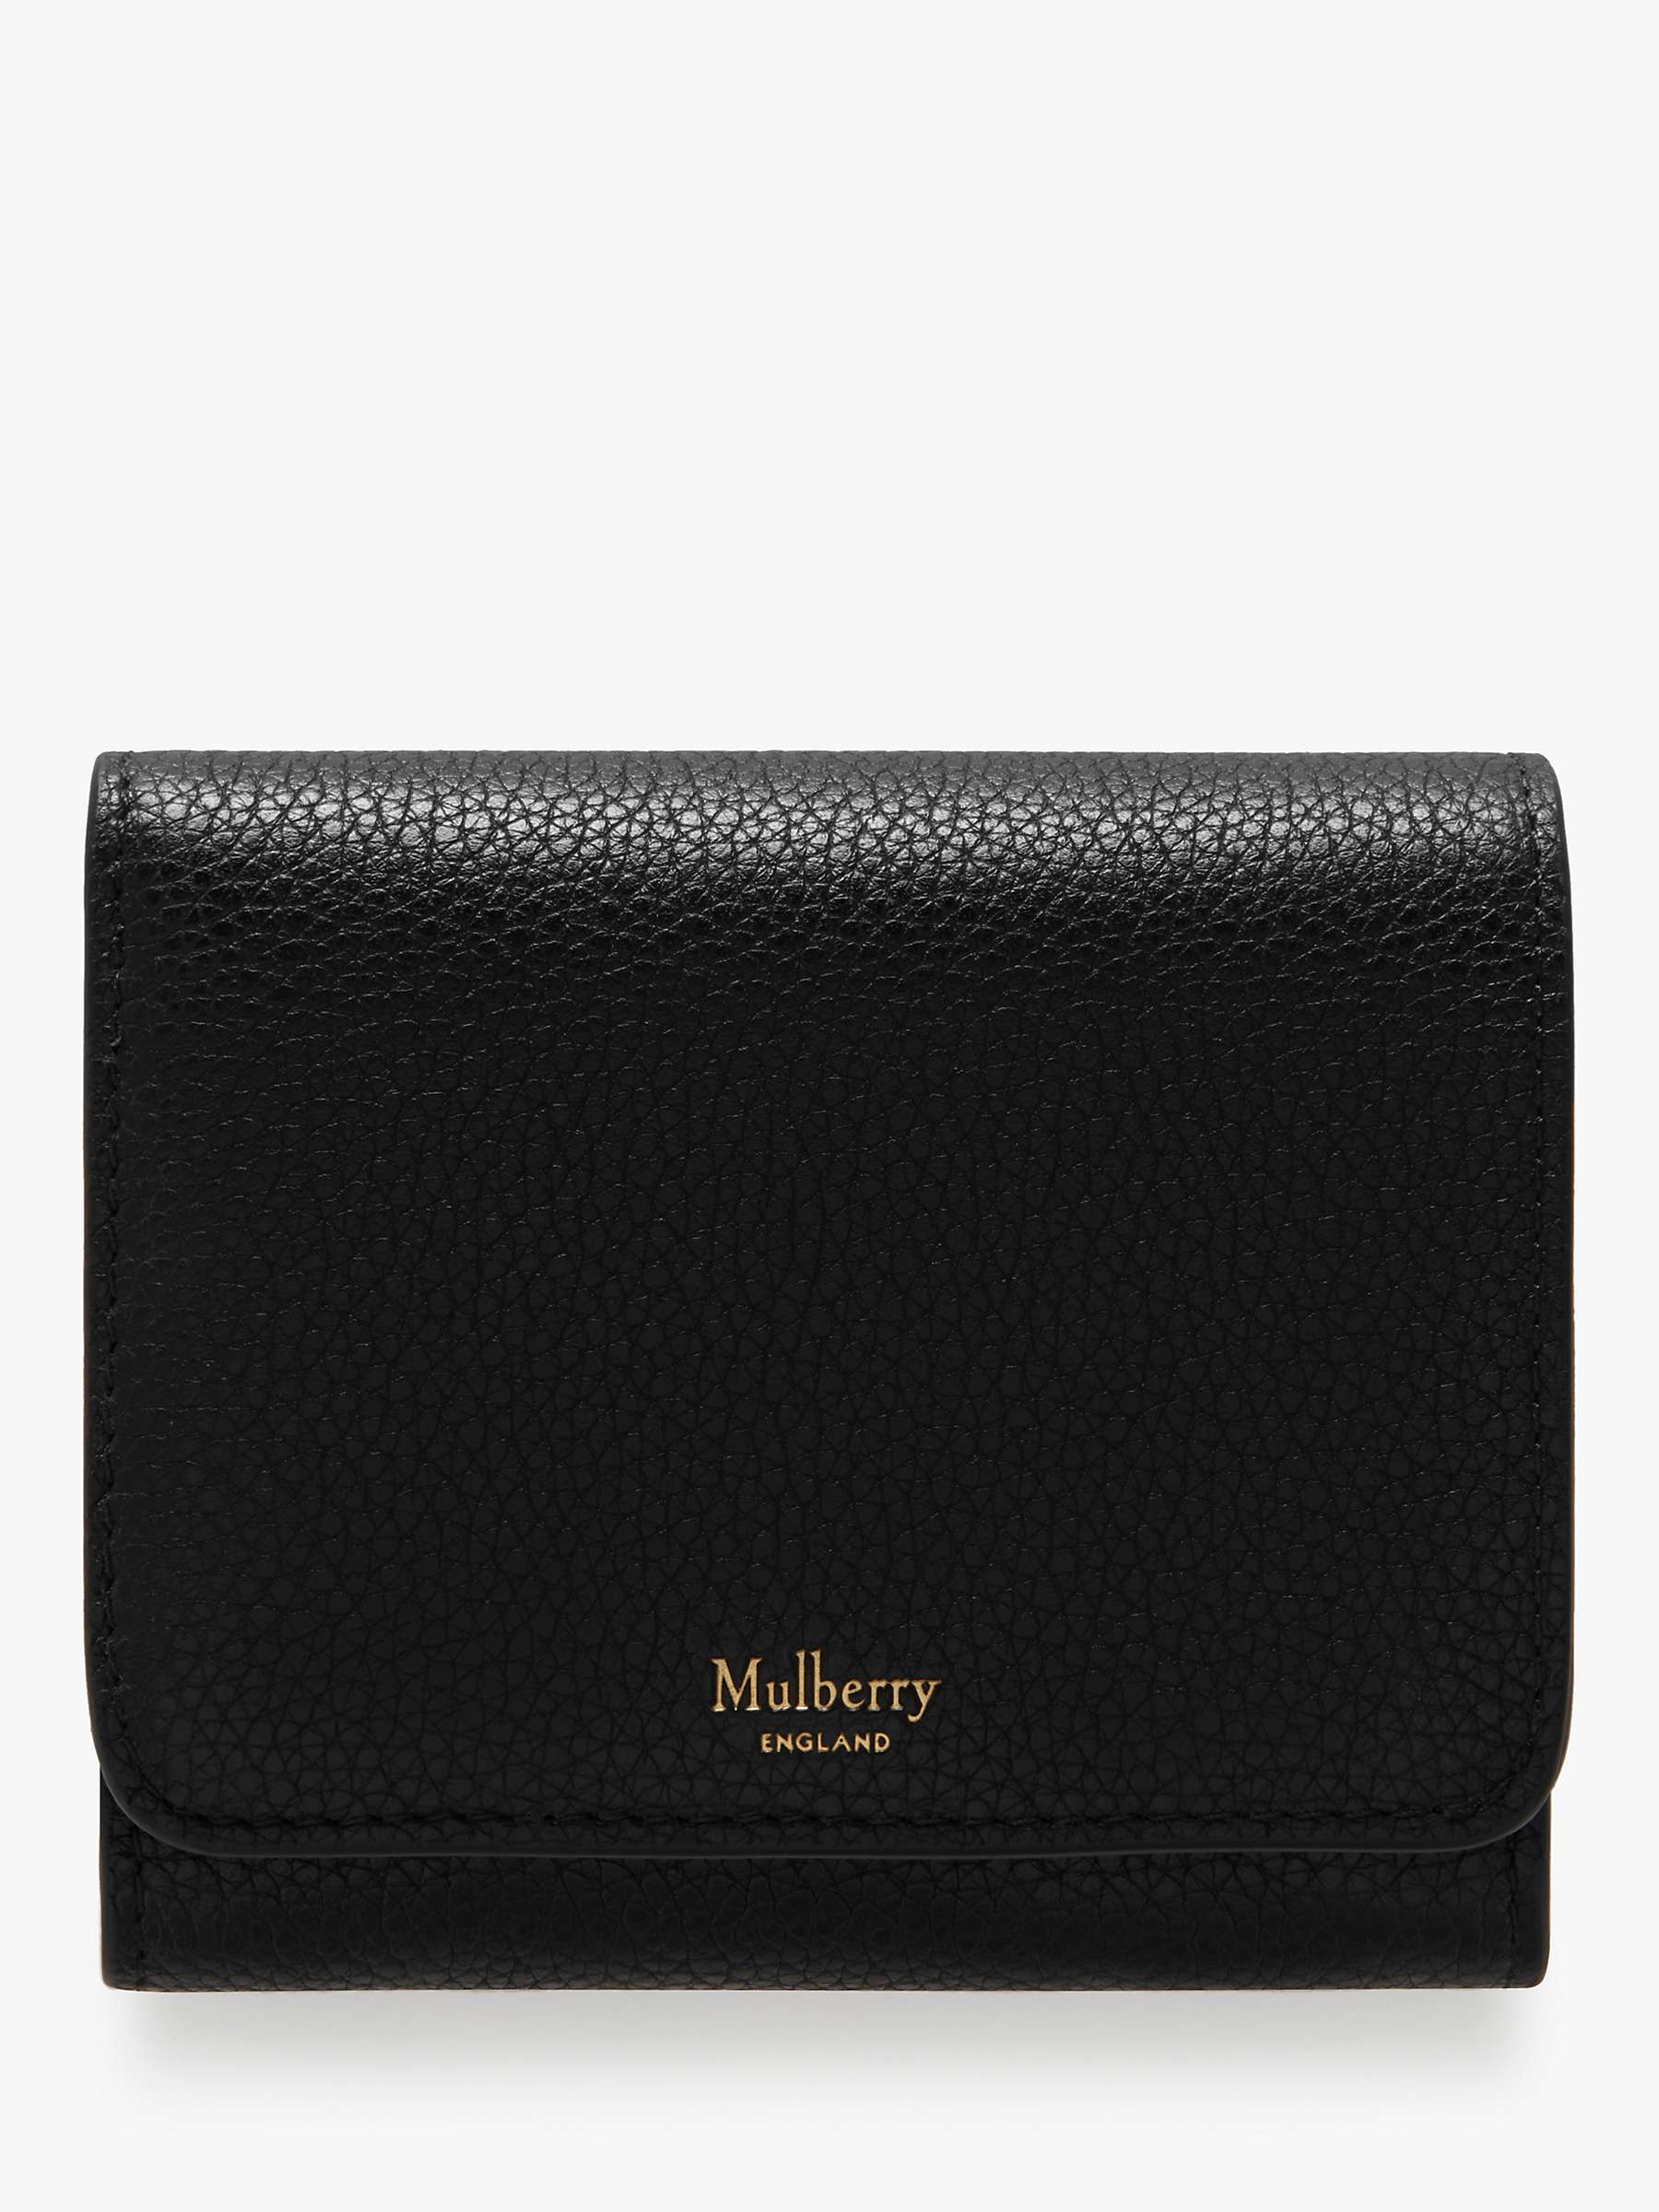 Buy Mulberry Continental Classic Grain Leather Small French Purse Online at johnlewis.com